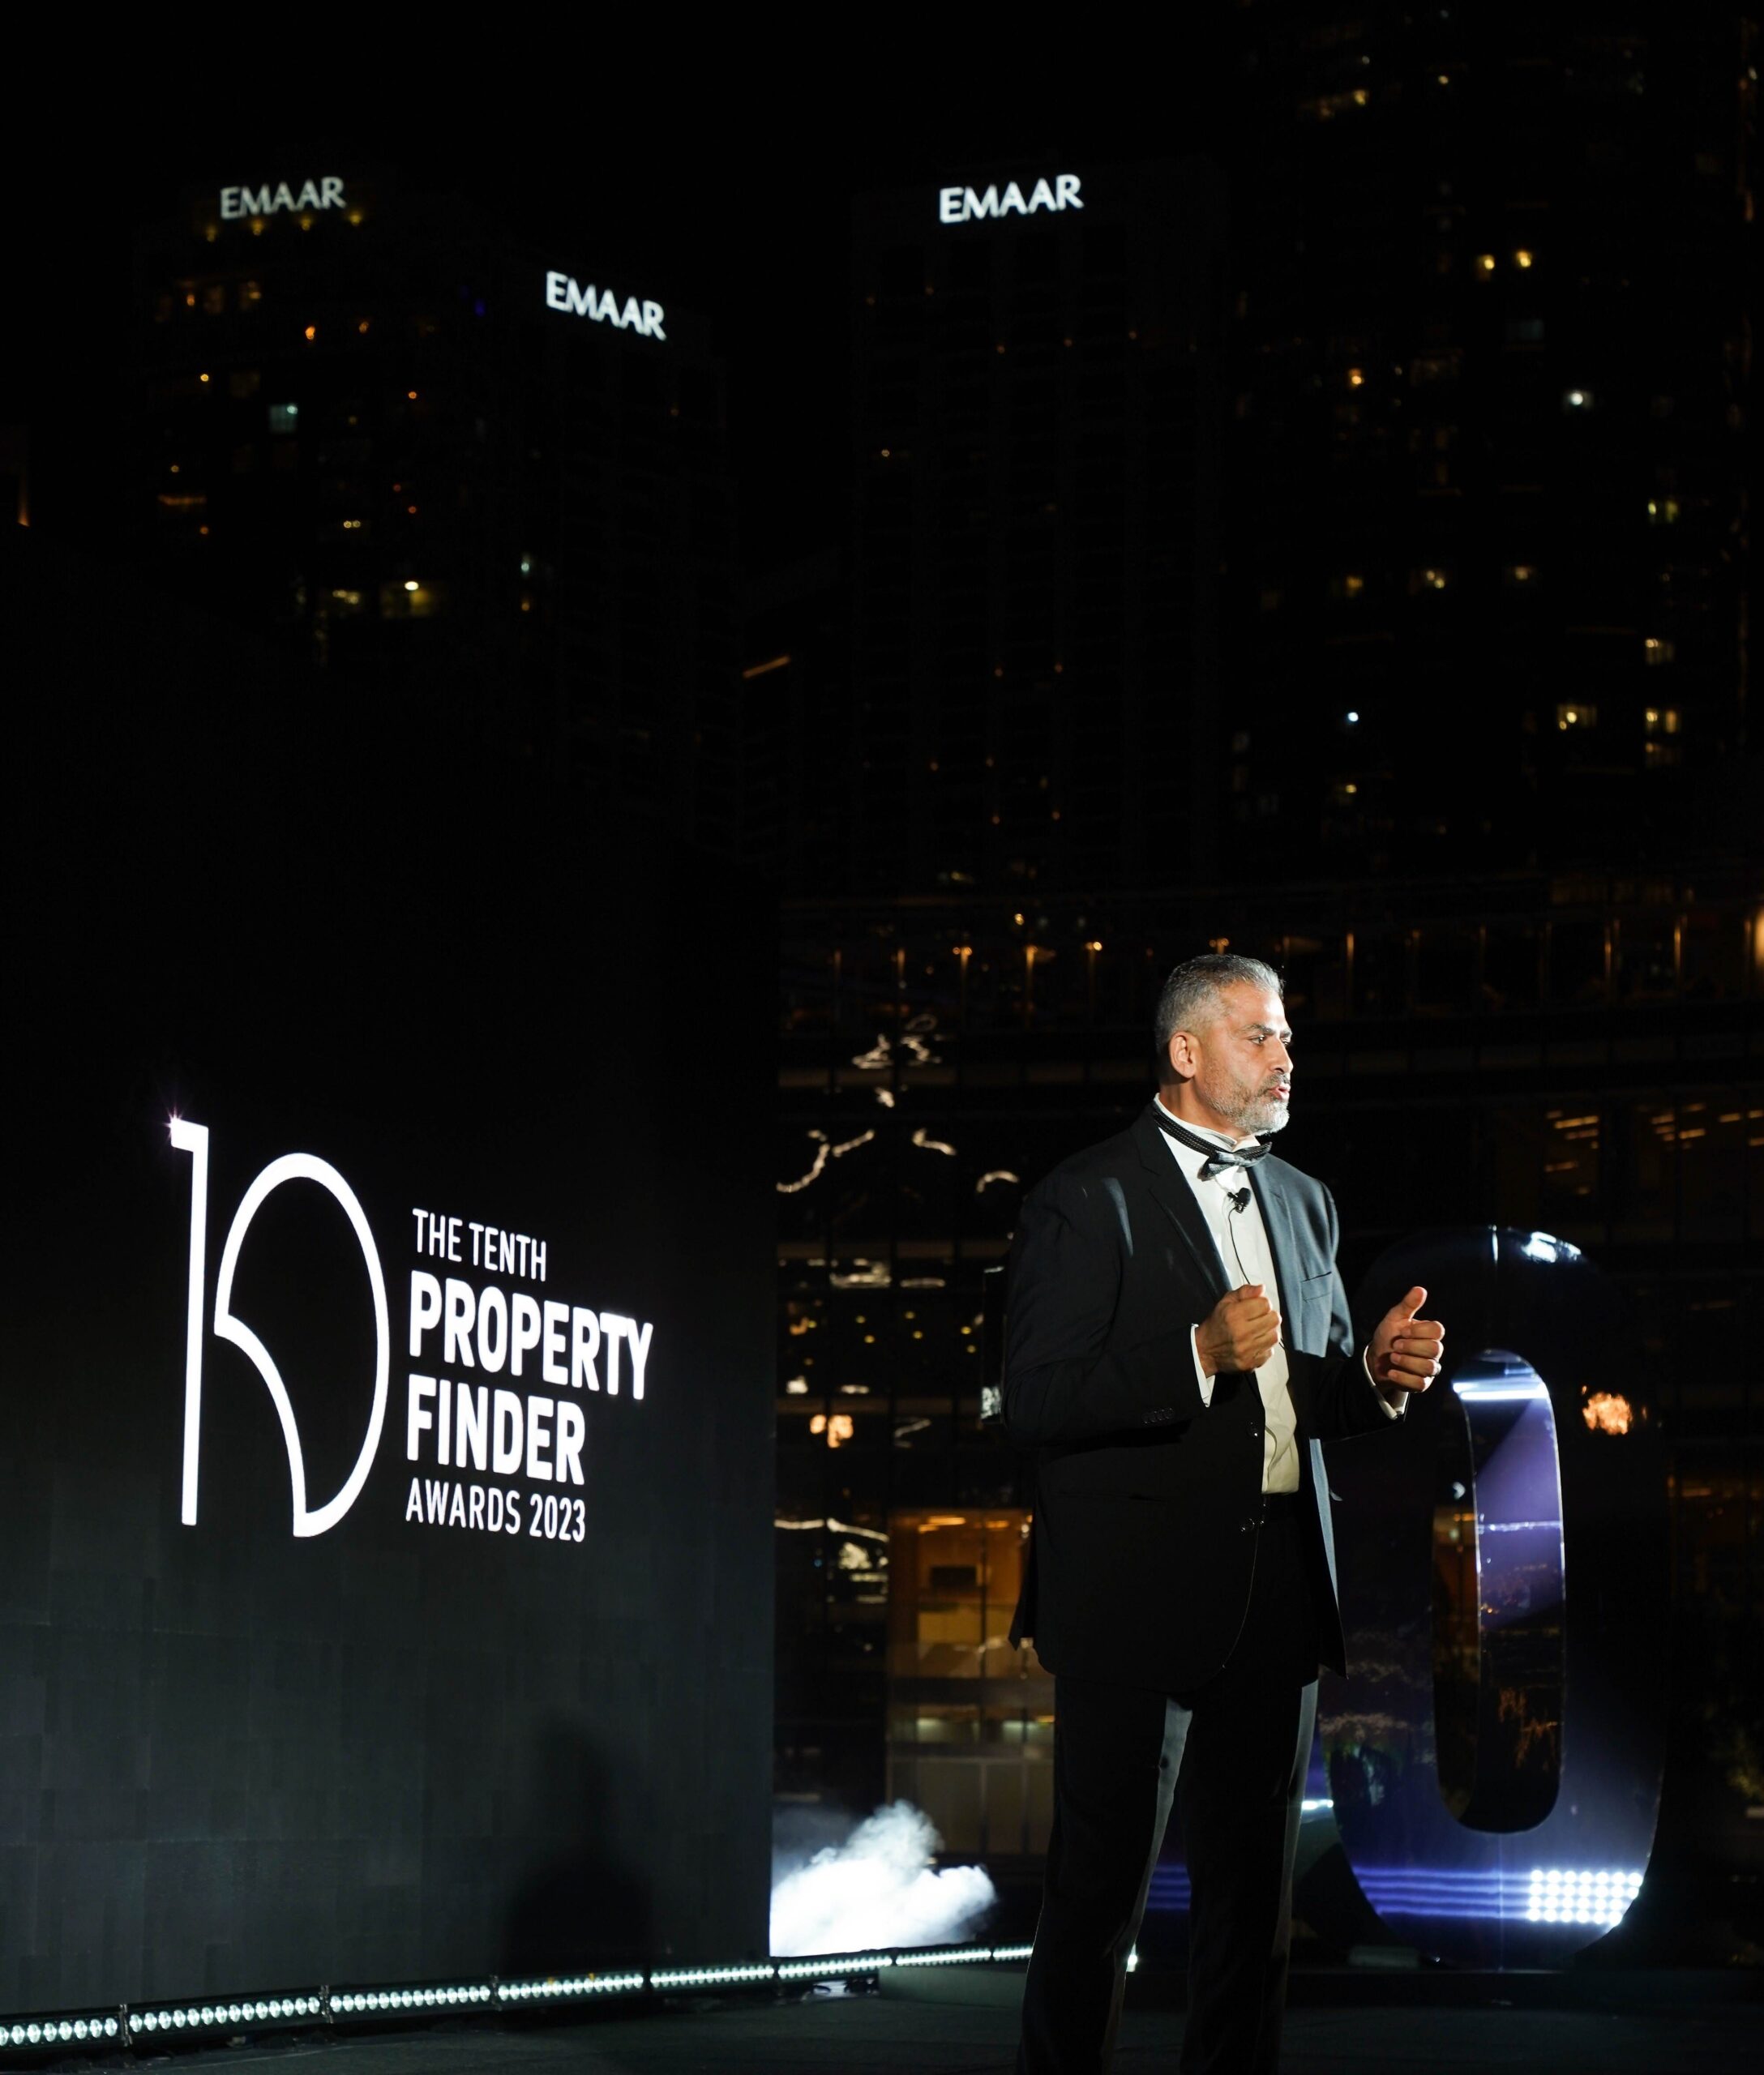 The 10th Annual Property Finder Awards recognizes the impact champions within the UAE’s growing real estate sector